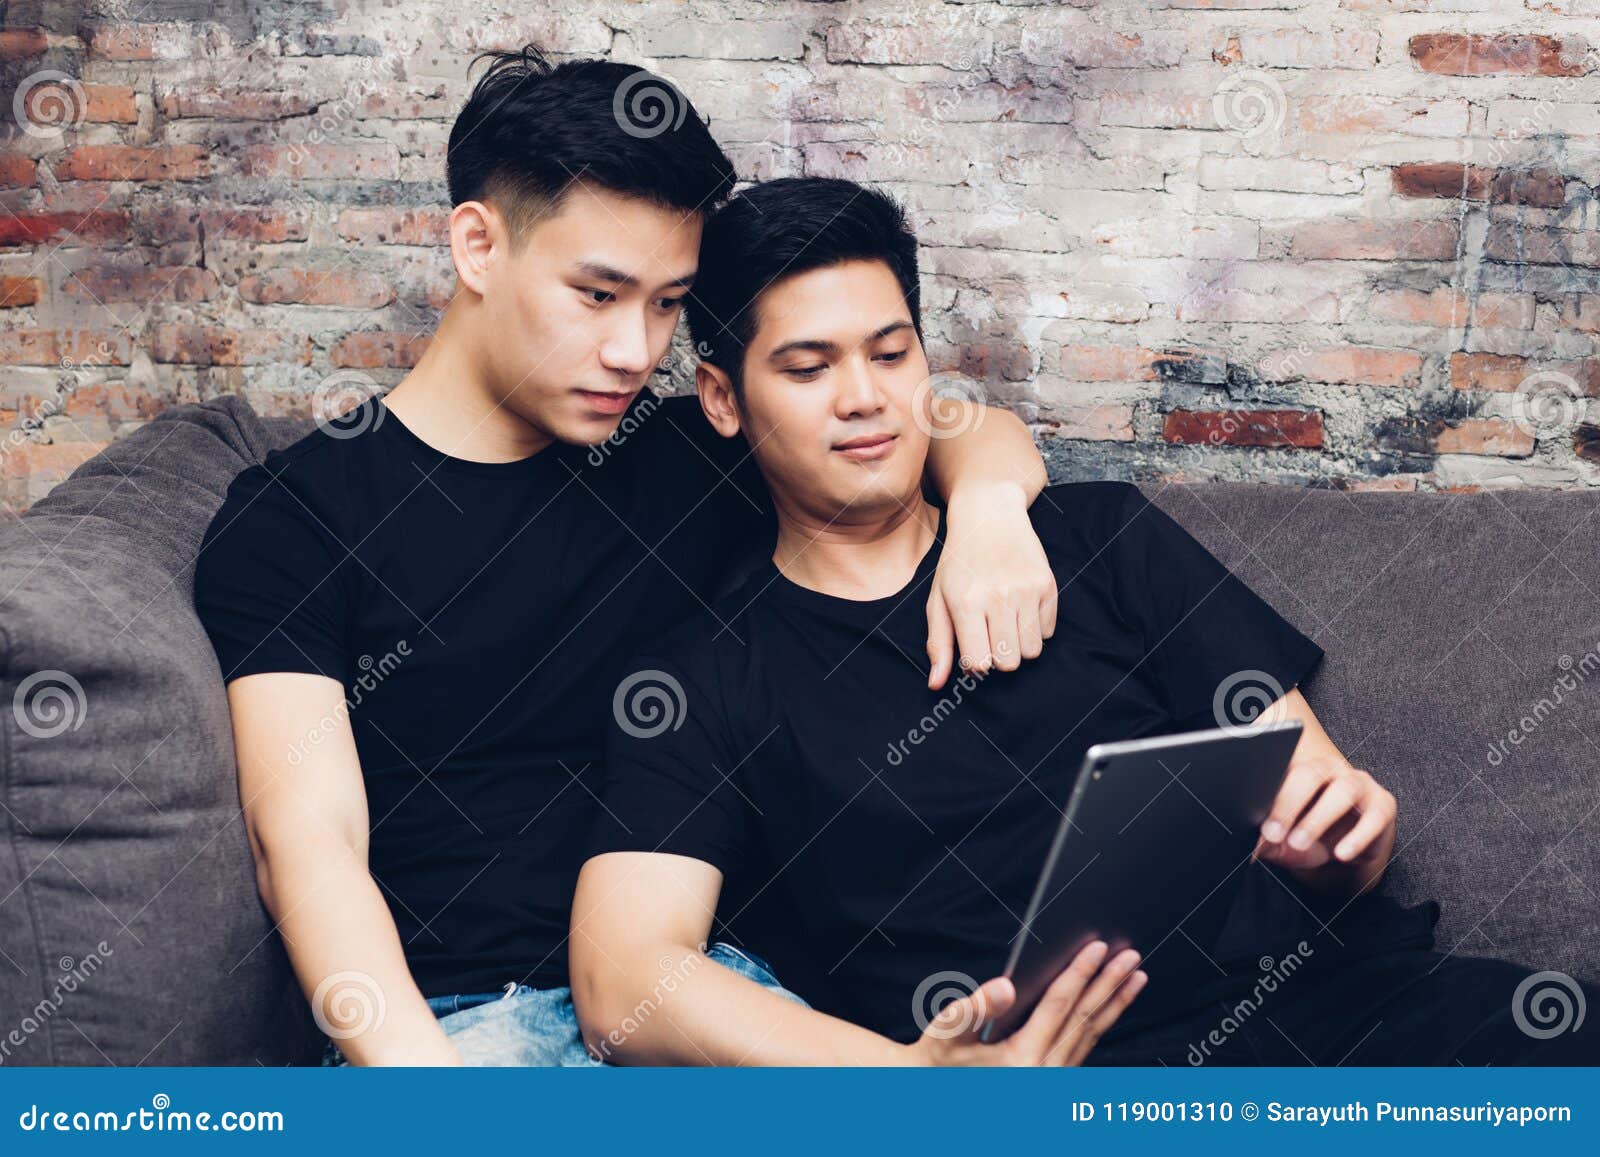 Asian Gay Couple Watching And Looking At Phone Tablet Together Portrait Of Happy Gay Men 